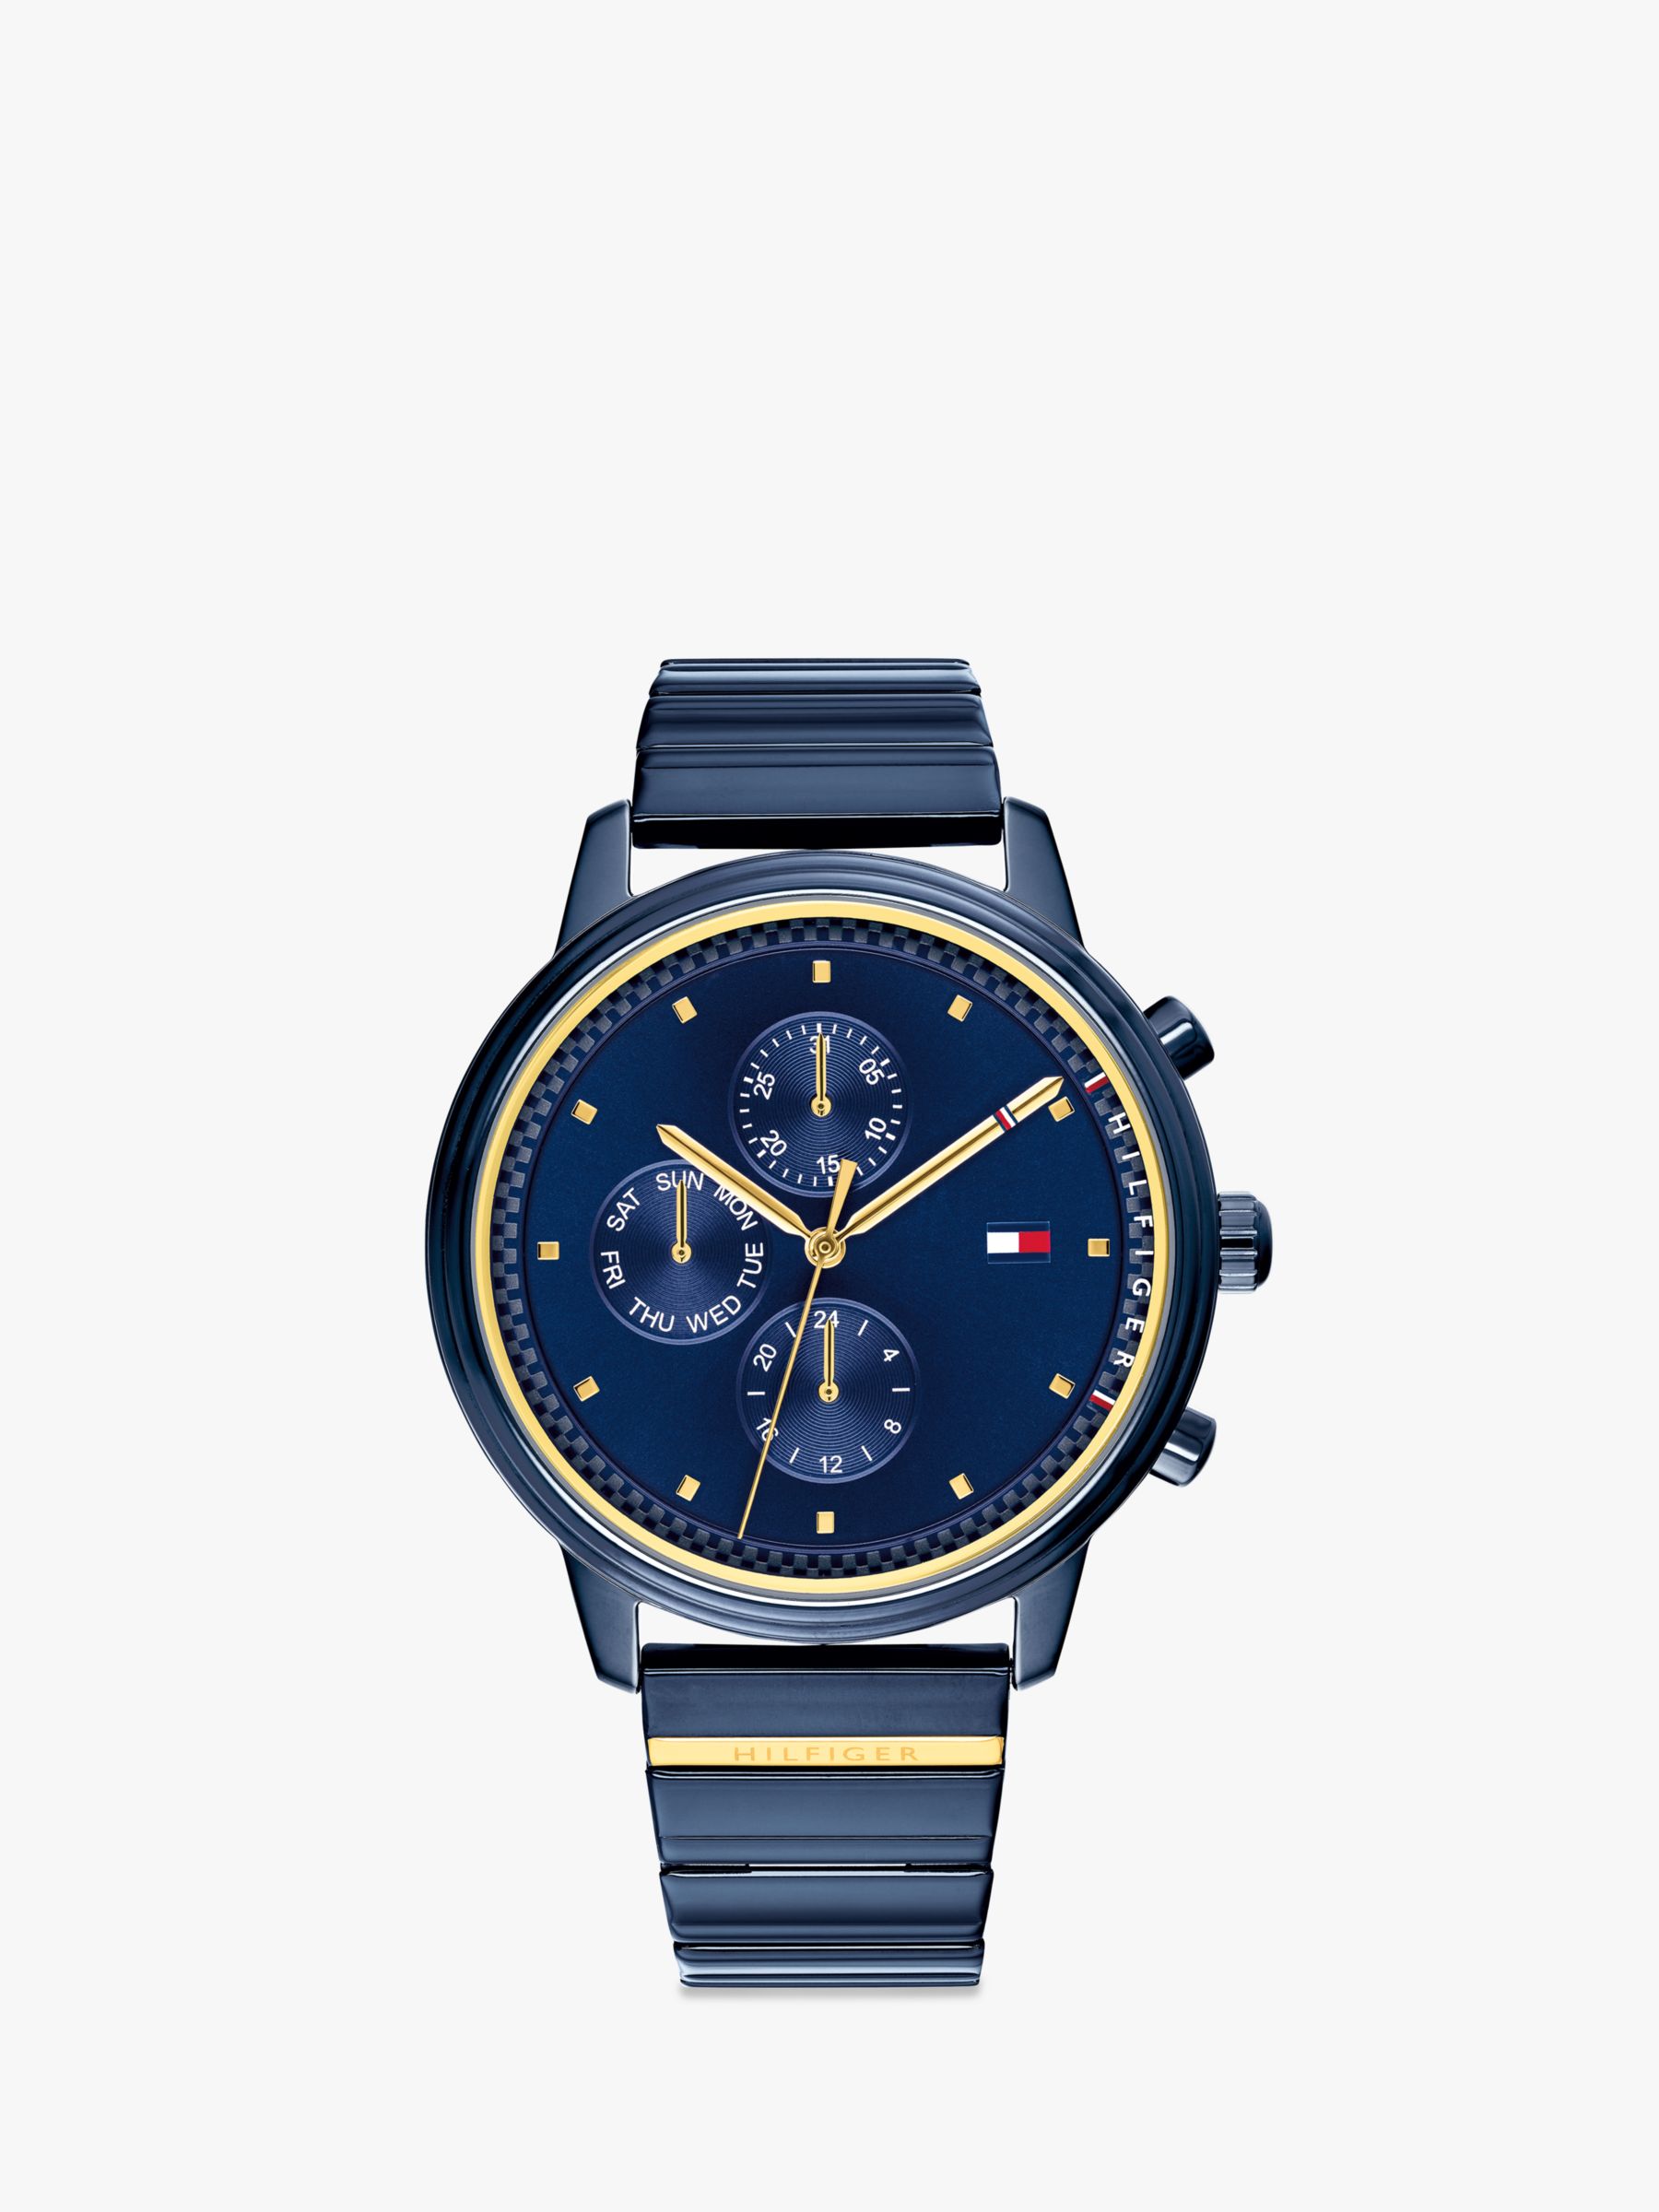 are hilfiger watches good